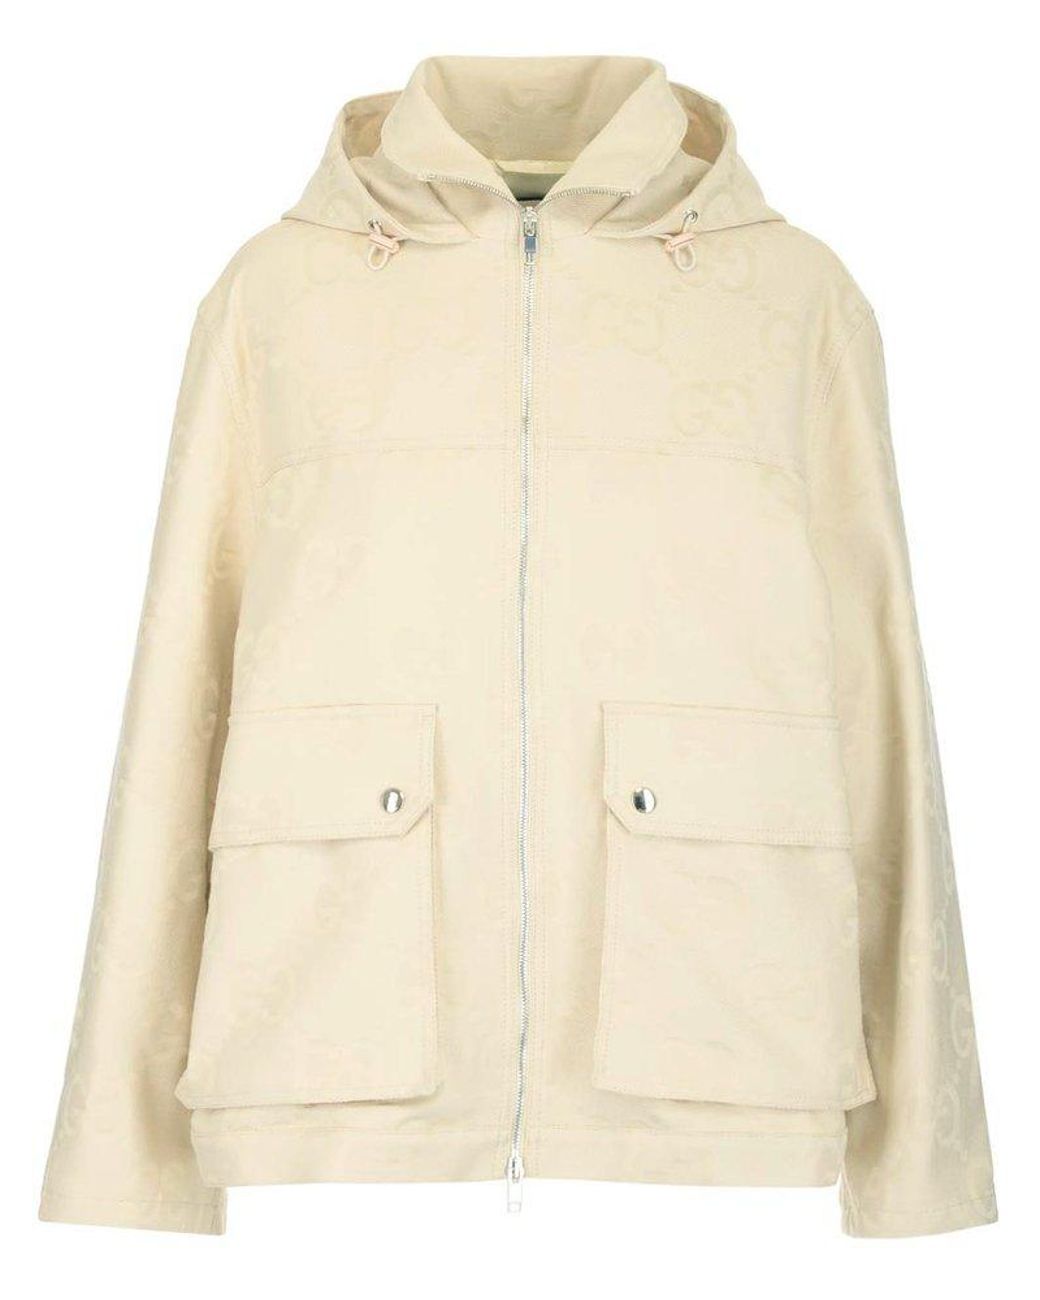 Gucci Cotton Allover Jumbo GG Hooded Puffer Jacket in White | Lyst UK